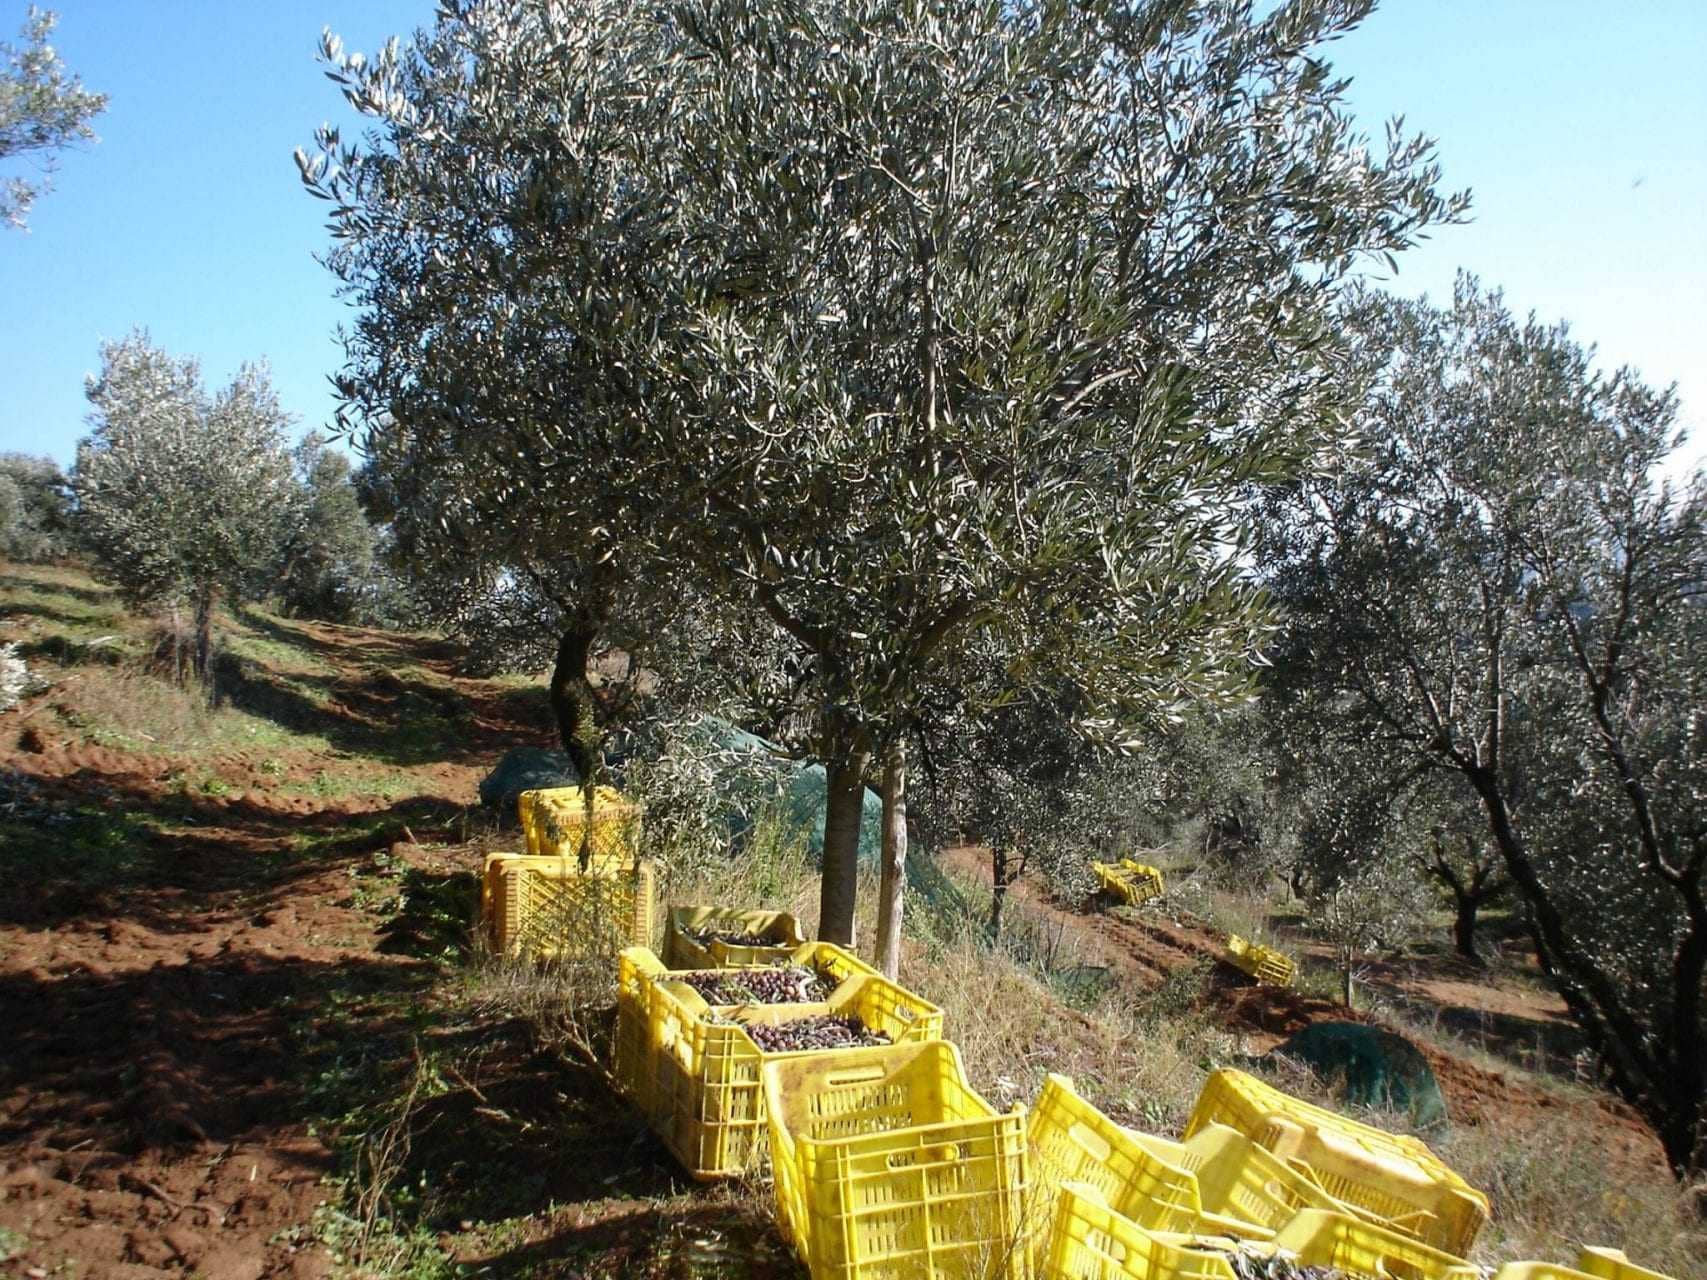 europe-competitions-the-best-olive-oils-world-strong-showing-by-calabrian-producers-at-world-competition-olive-oil-times